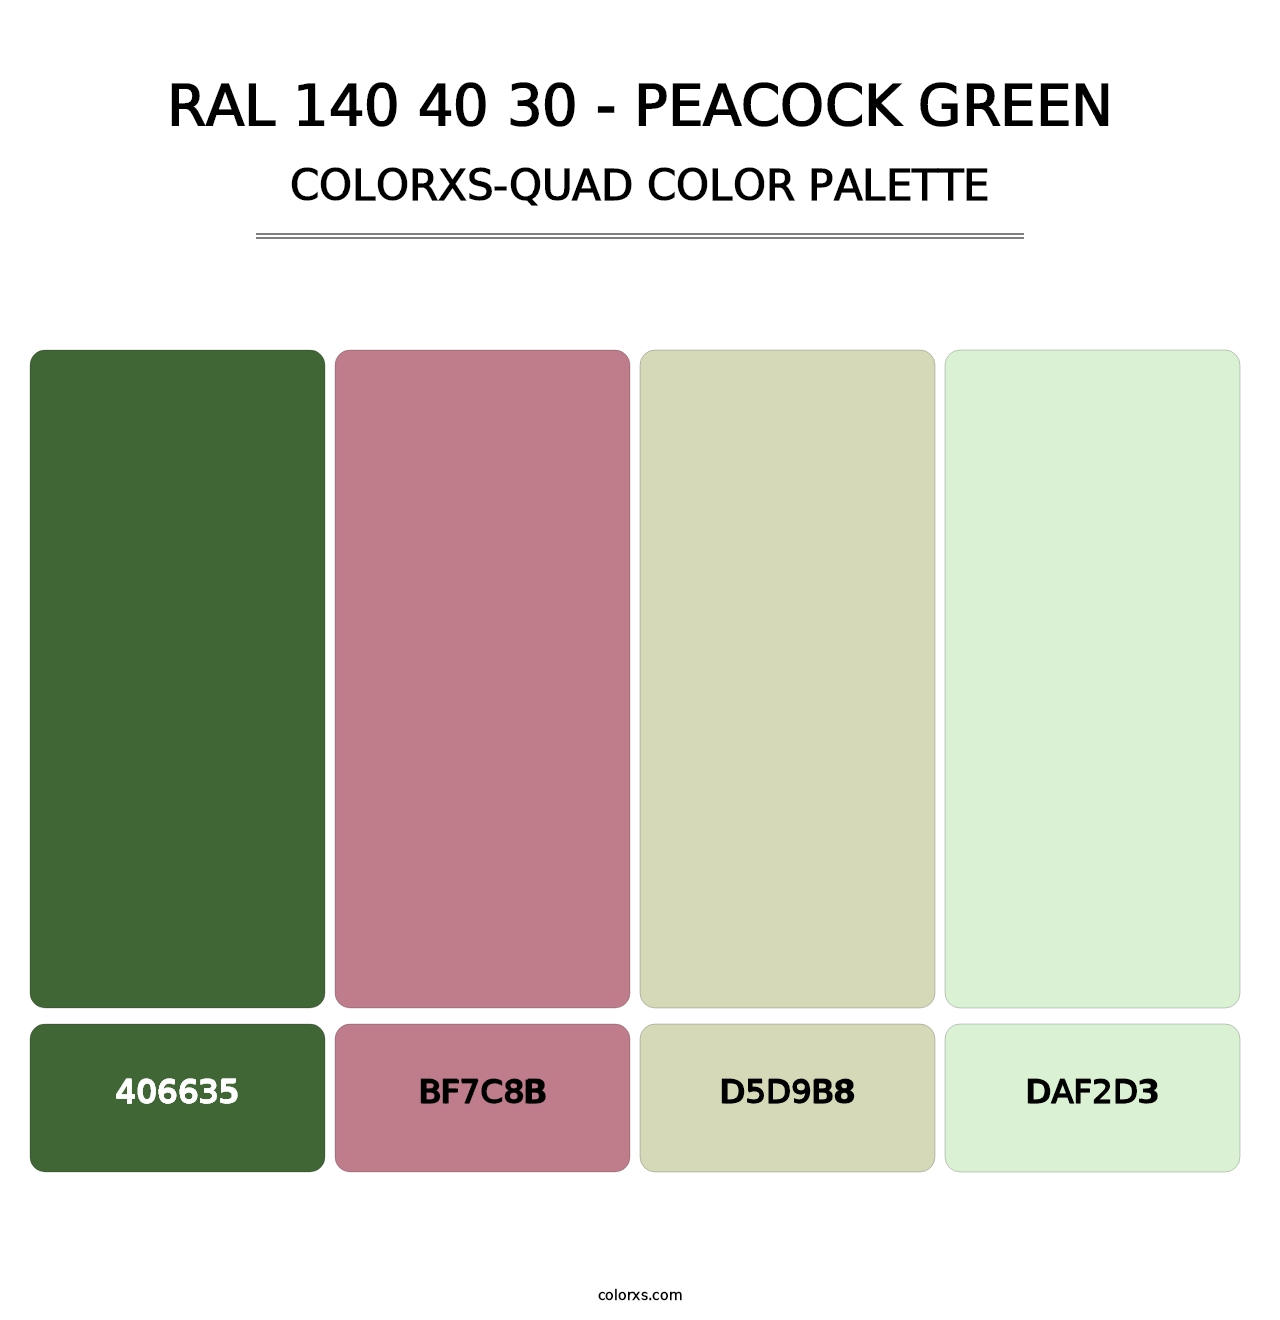 RAL 140 40 30 - Peacock Green - Colorxs Quad Palette